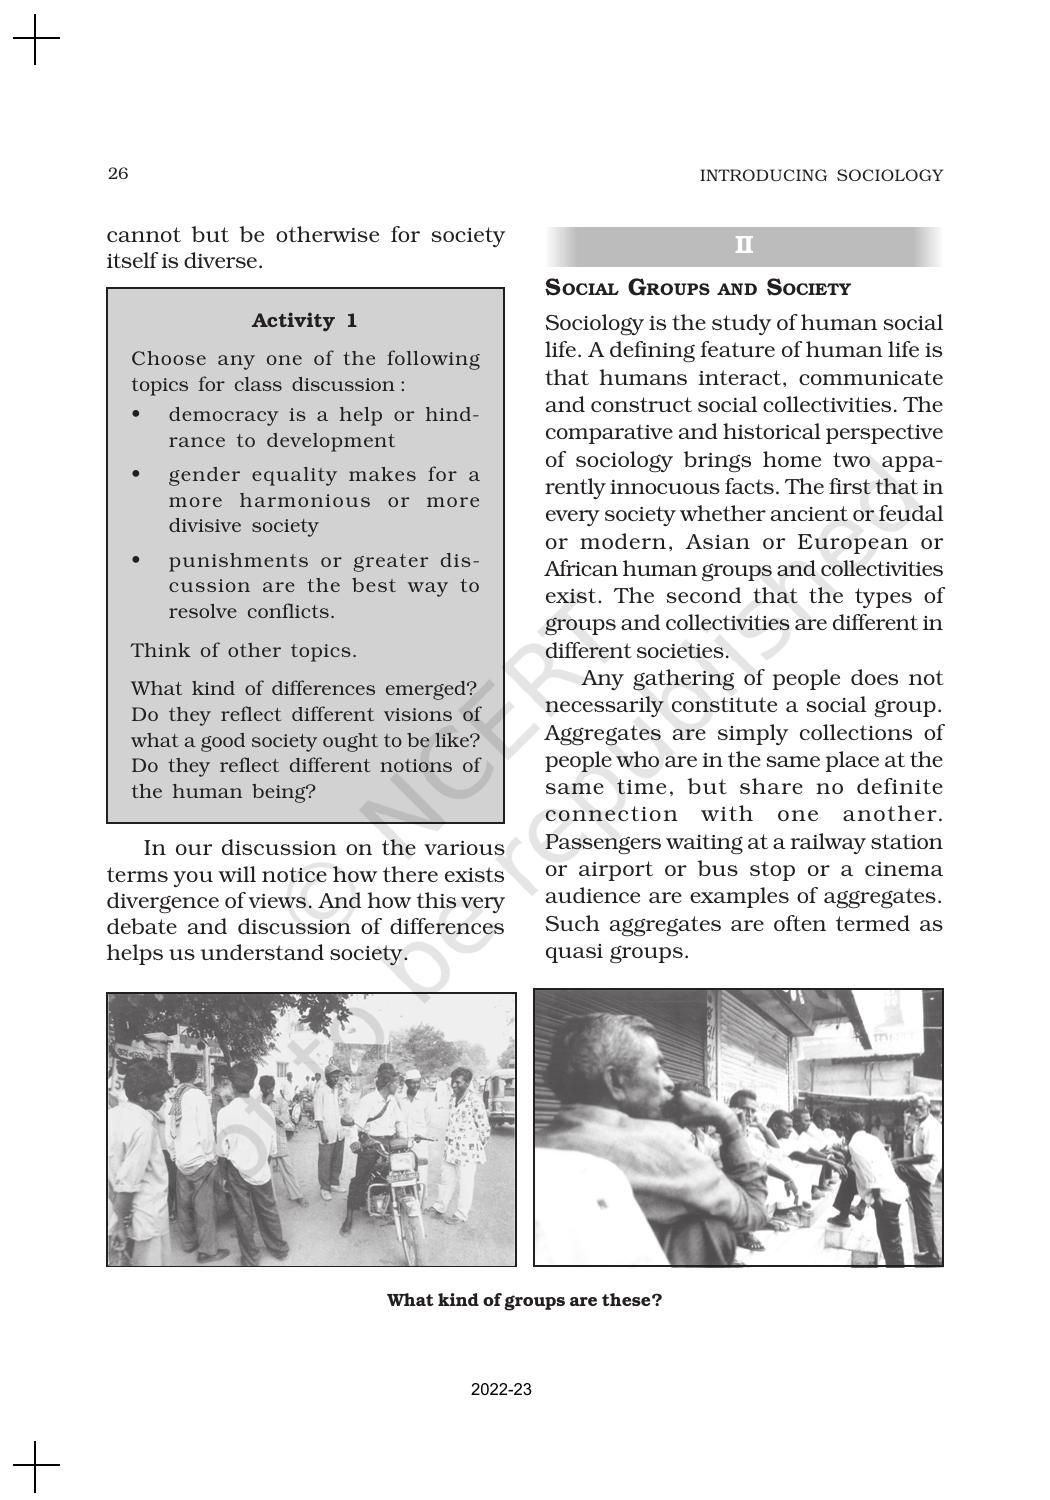 NCERT Book for Class 11 Sociology (Part-I) Chapter 2 Terms, Concepts and Their Use in Sociology - Page 3